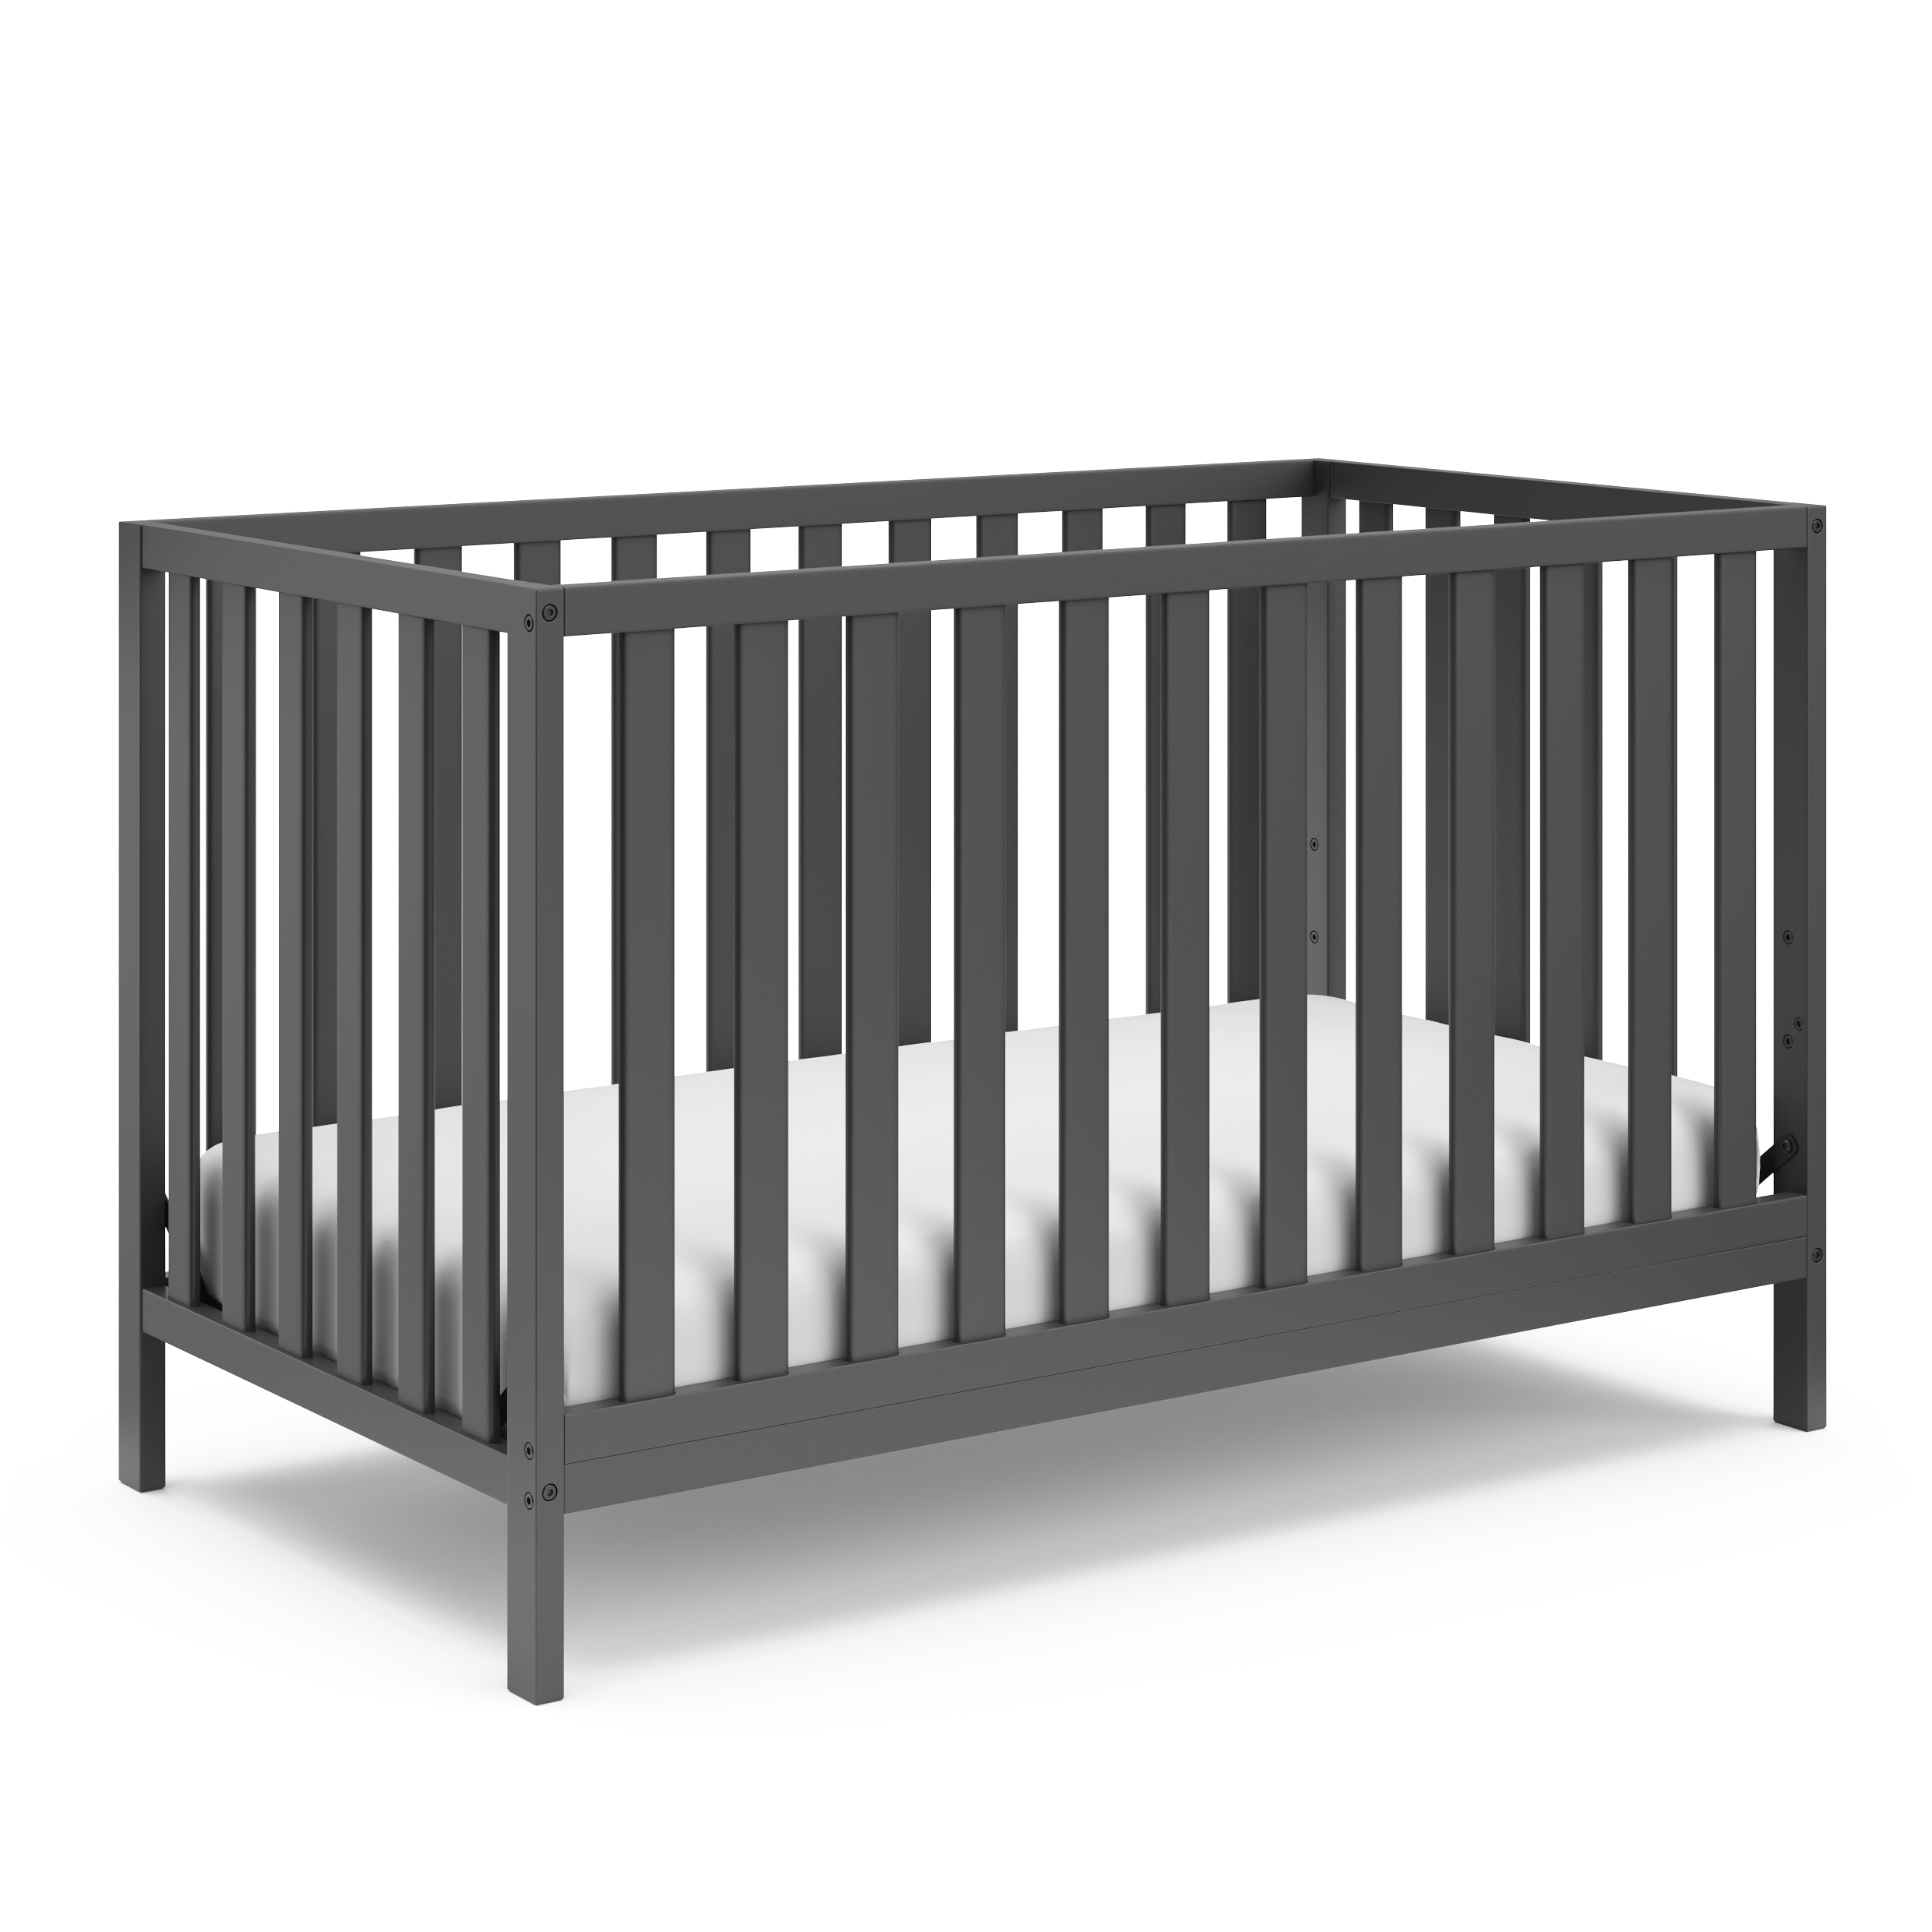 Storkcraft Sunset 4-in-1 Convertible Baby Crib, Gray - image 1 of 7